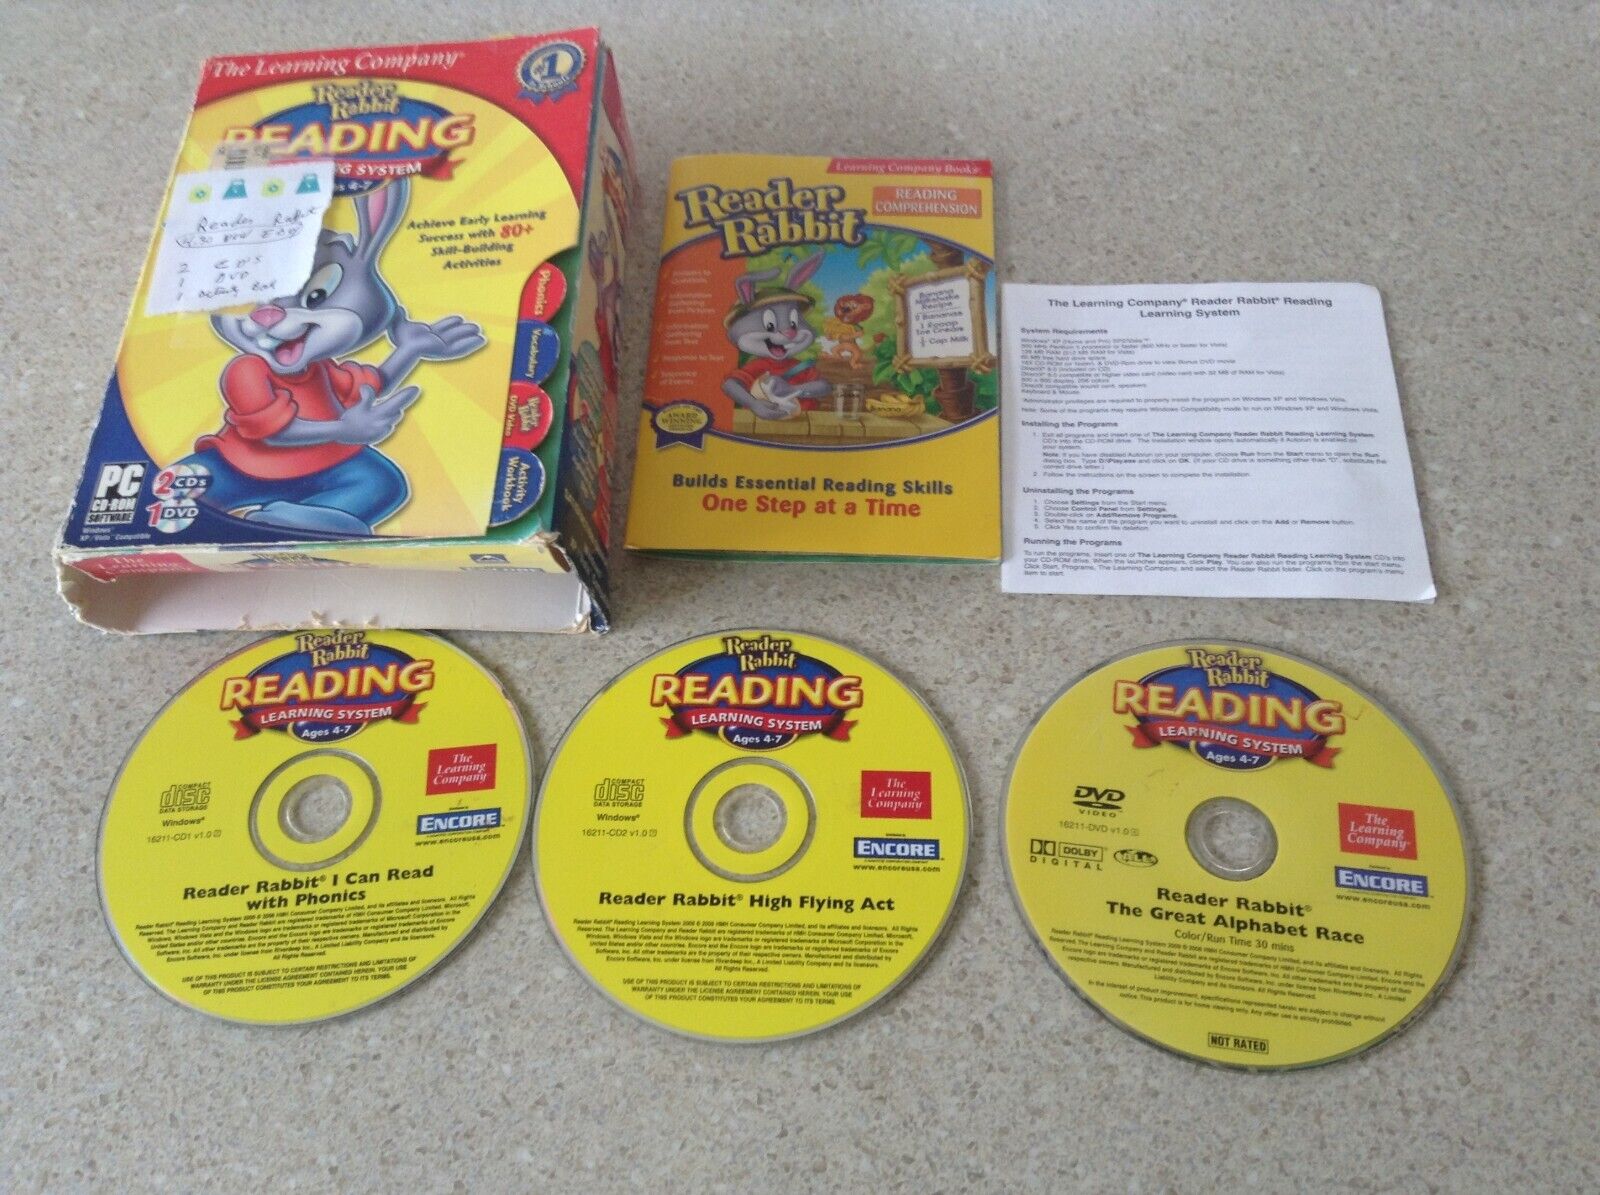 READER RABBIT learning system, ages 4-7  OS, 2 CD 1 DVD BOOK, PC cd rom software